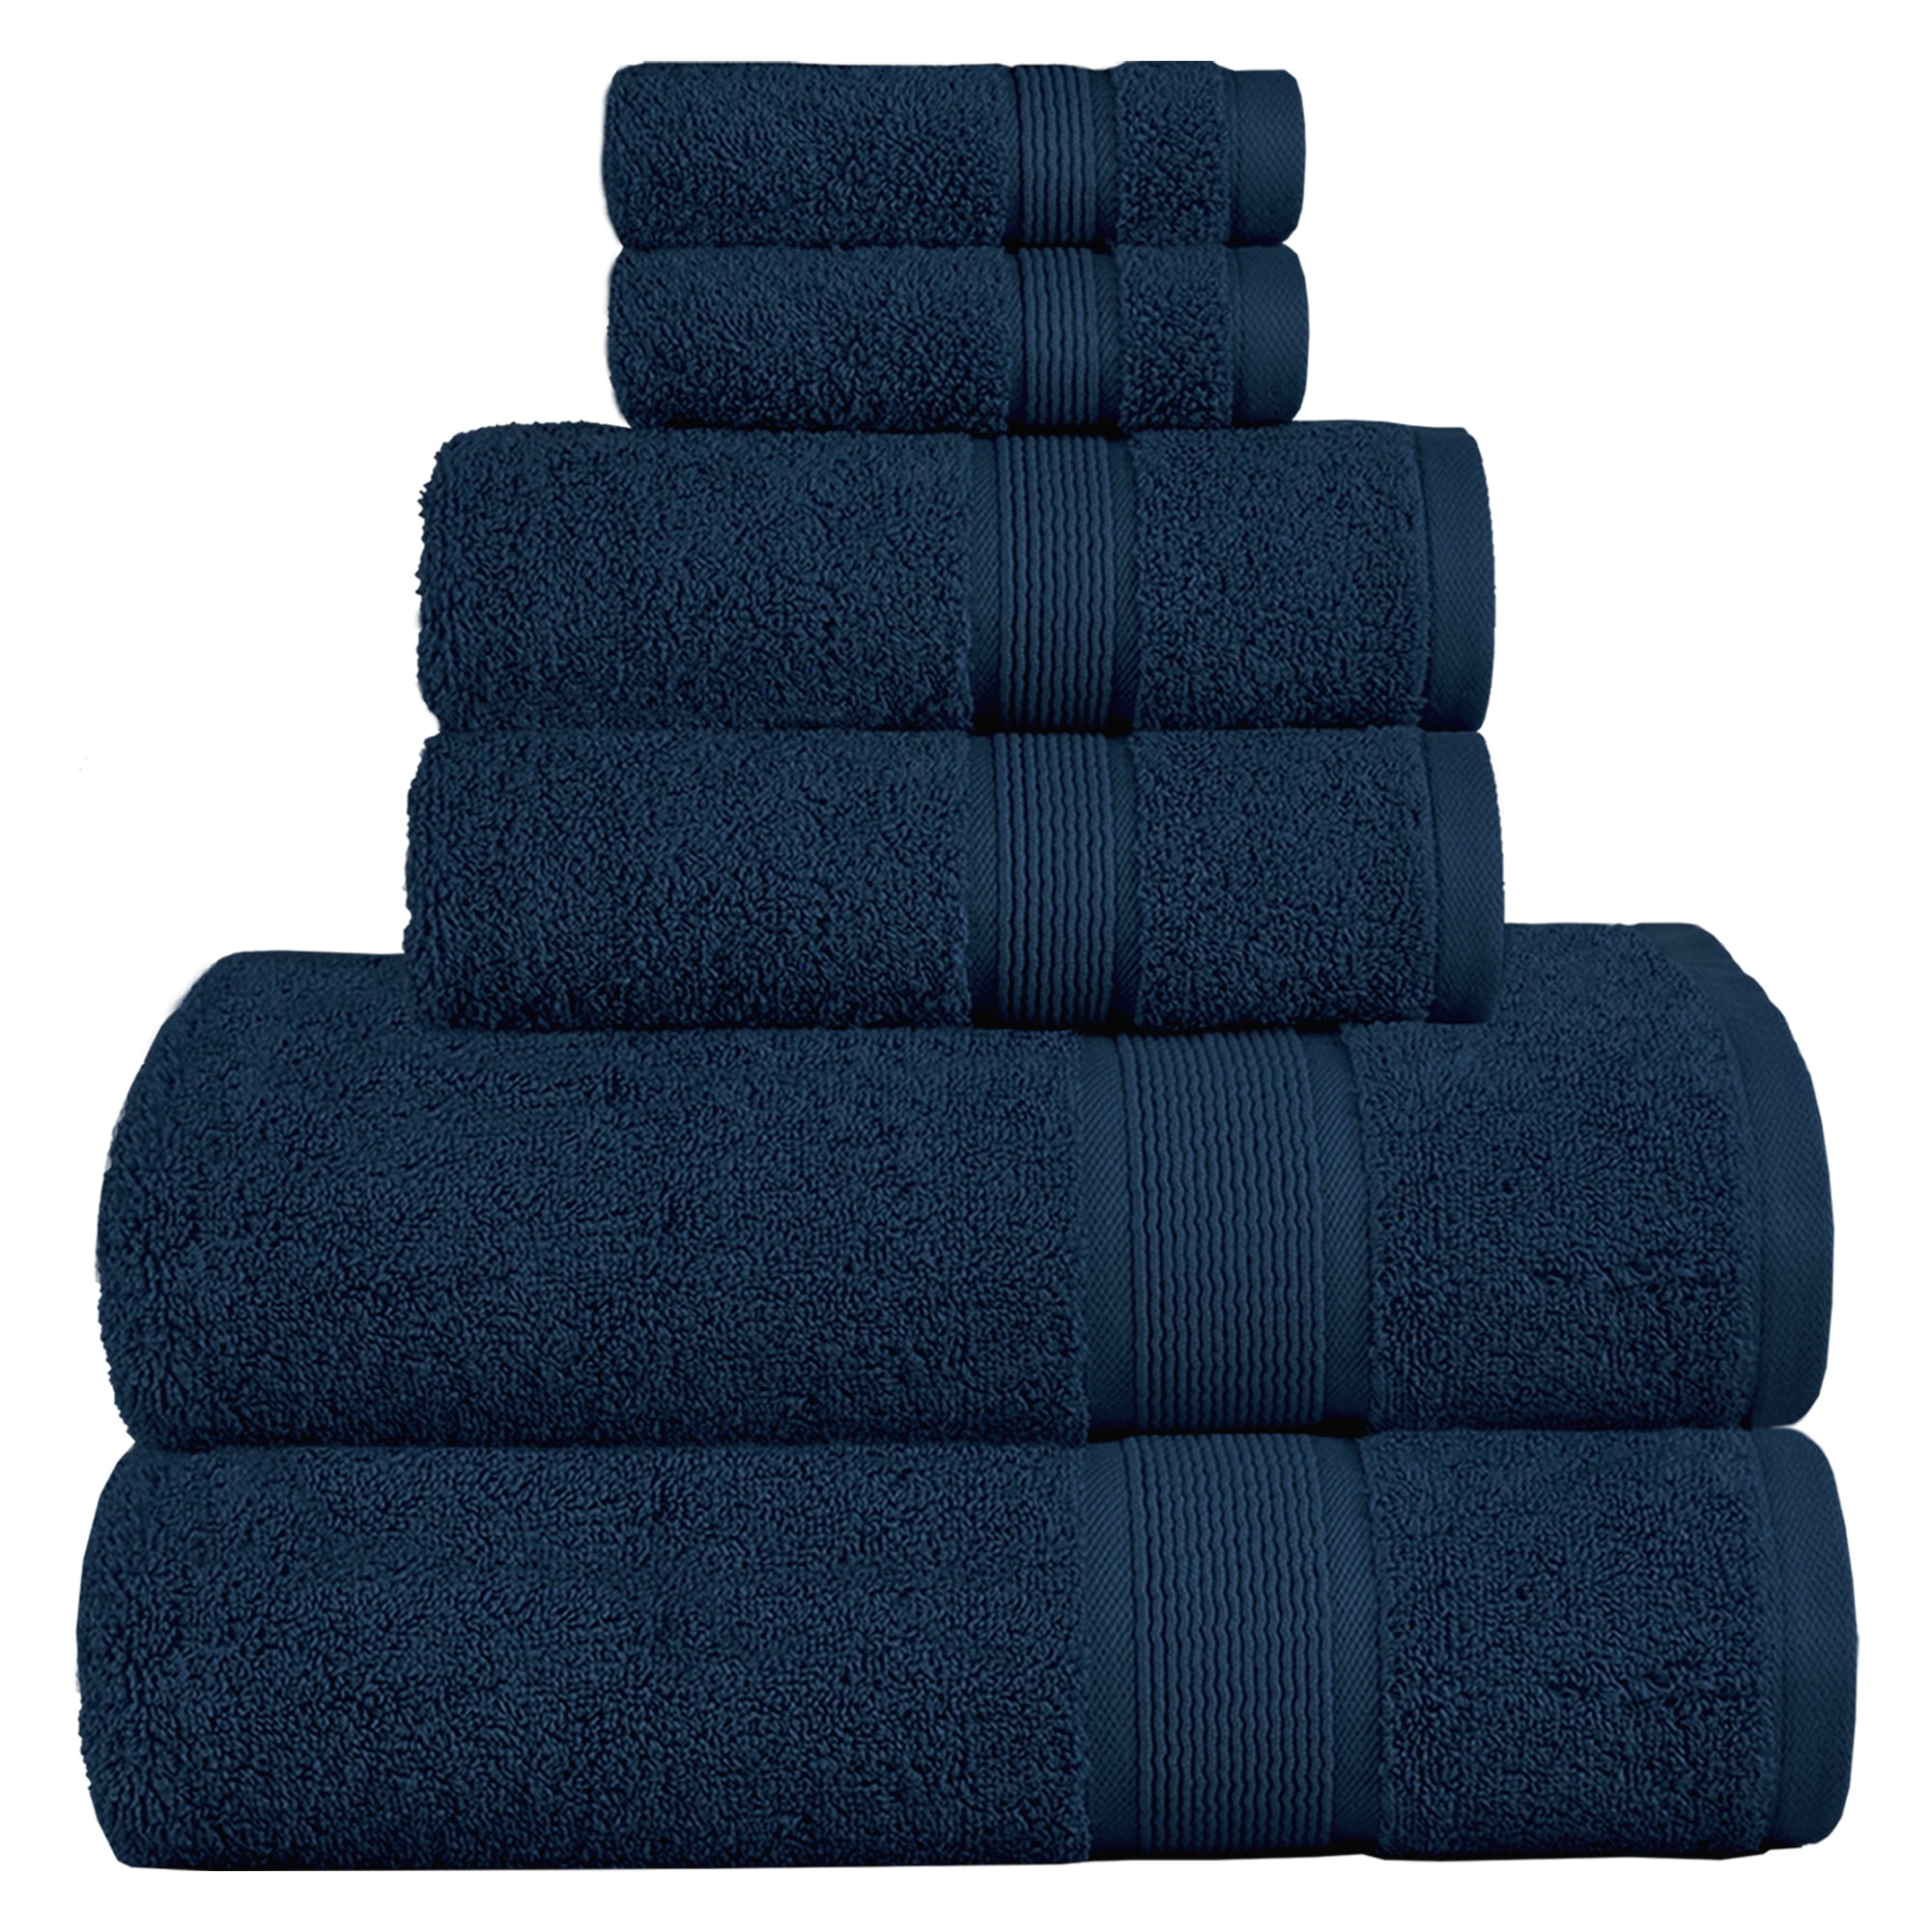 Details about   Bamboo Fiber 4-Piece Towels Set Soft Compact Fast Drying For Family Gift Towel 